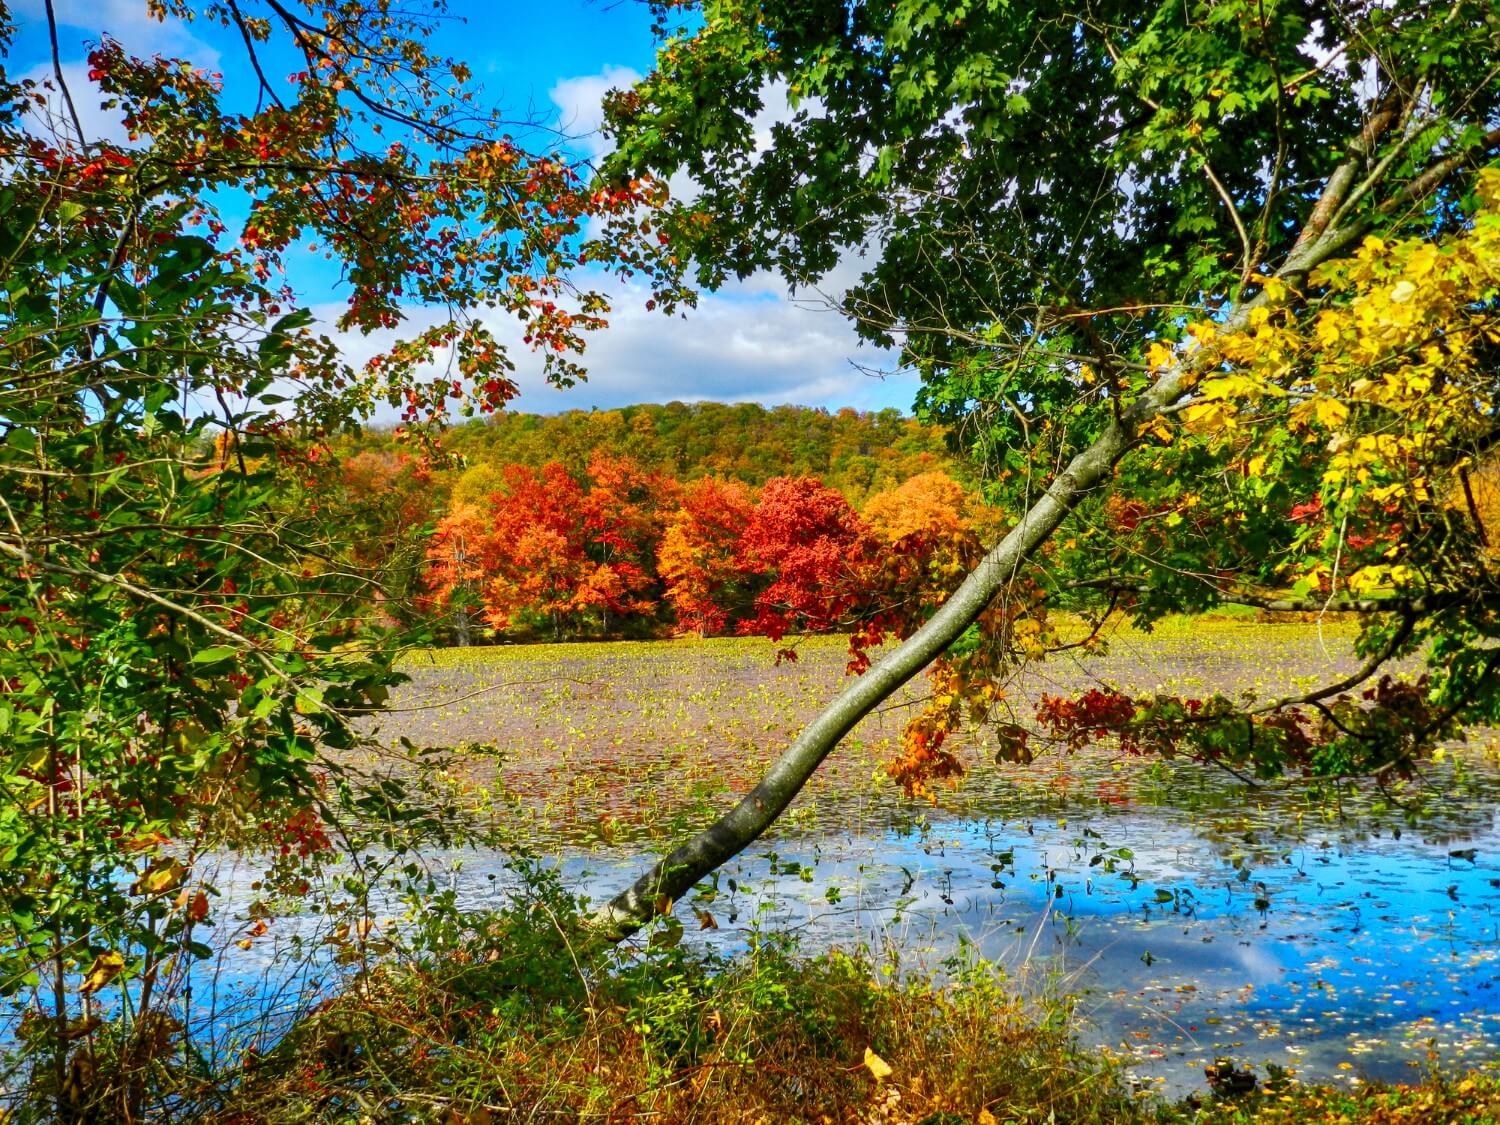 Our Favorite Things to Do in the Poconos in the Fall